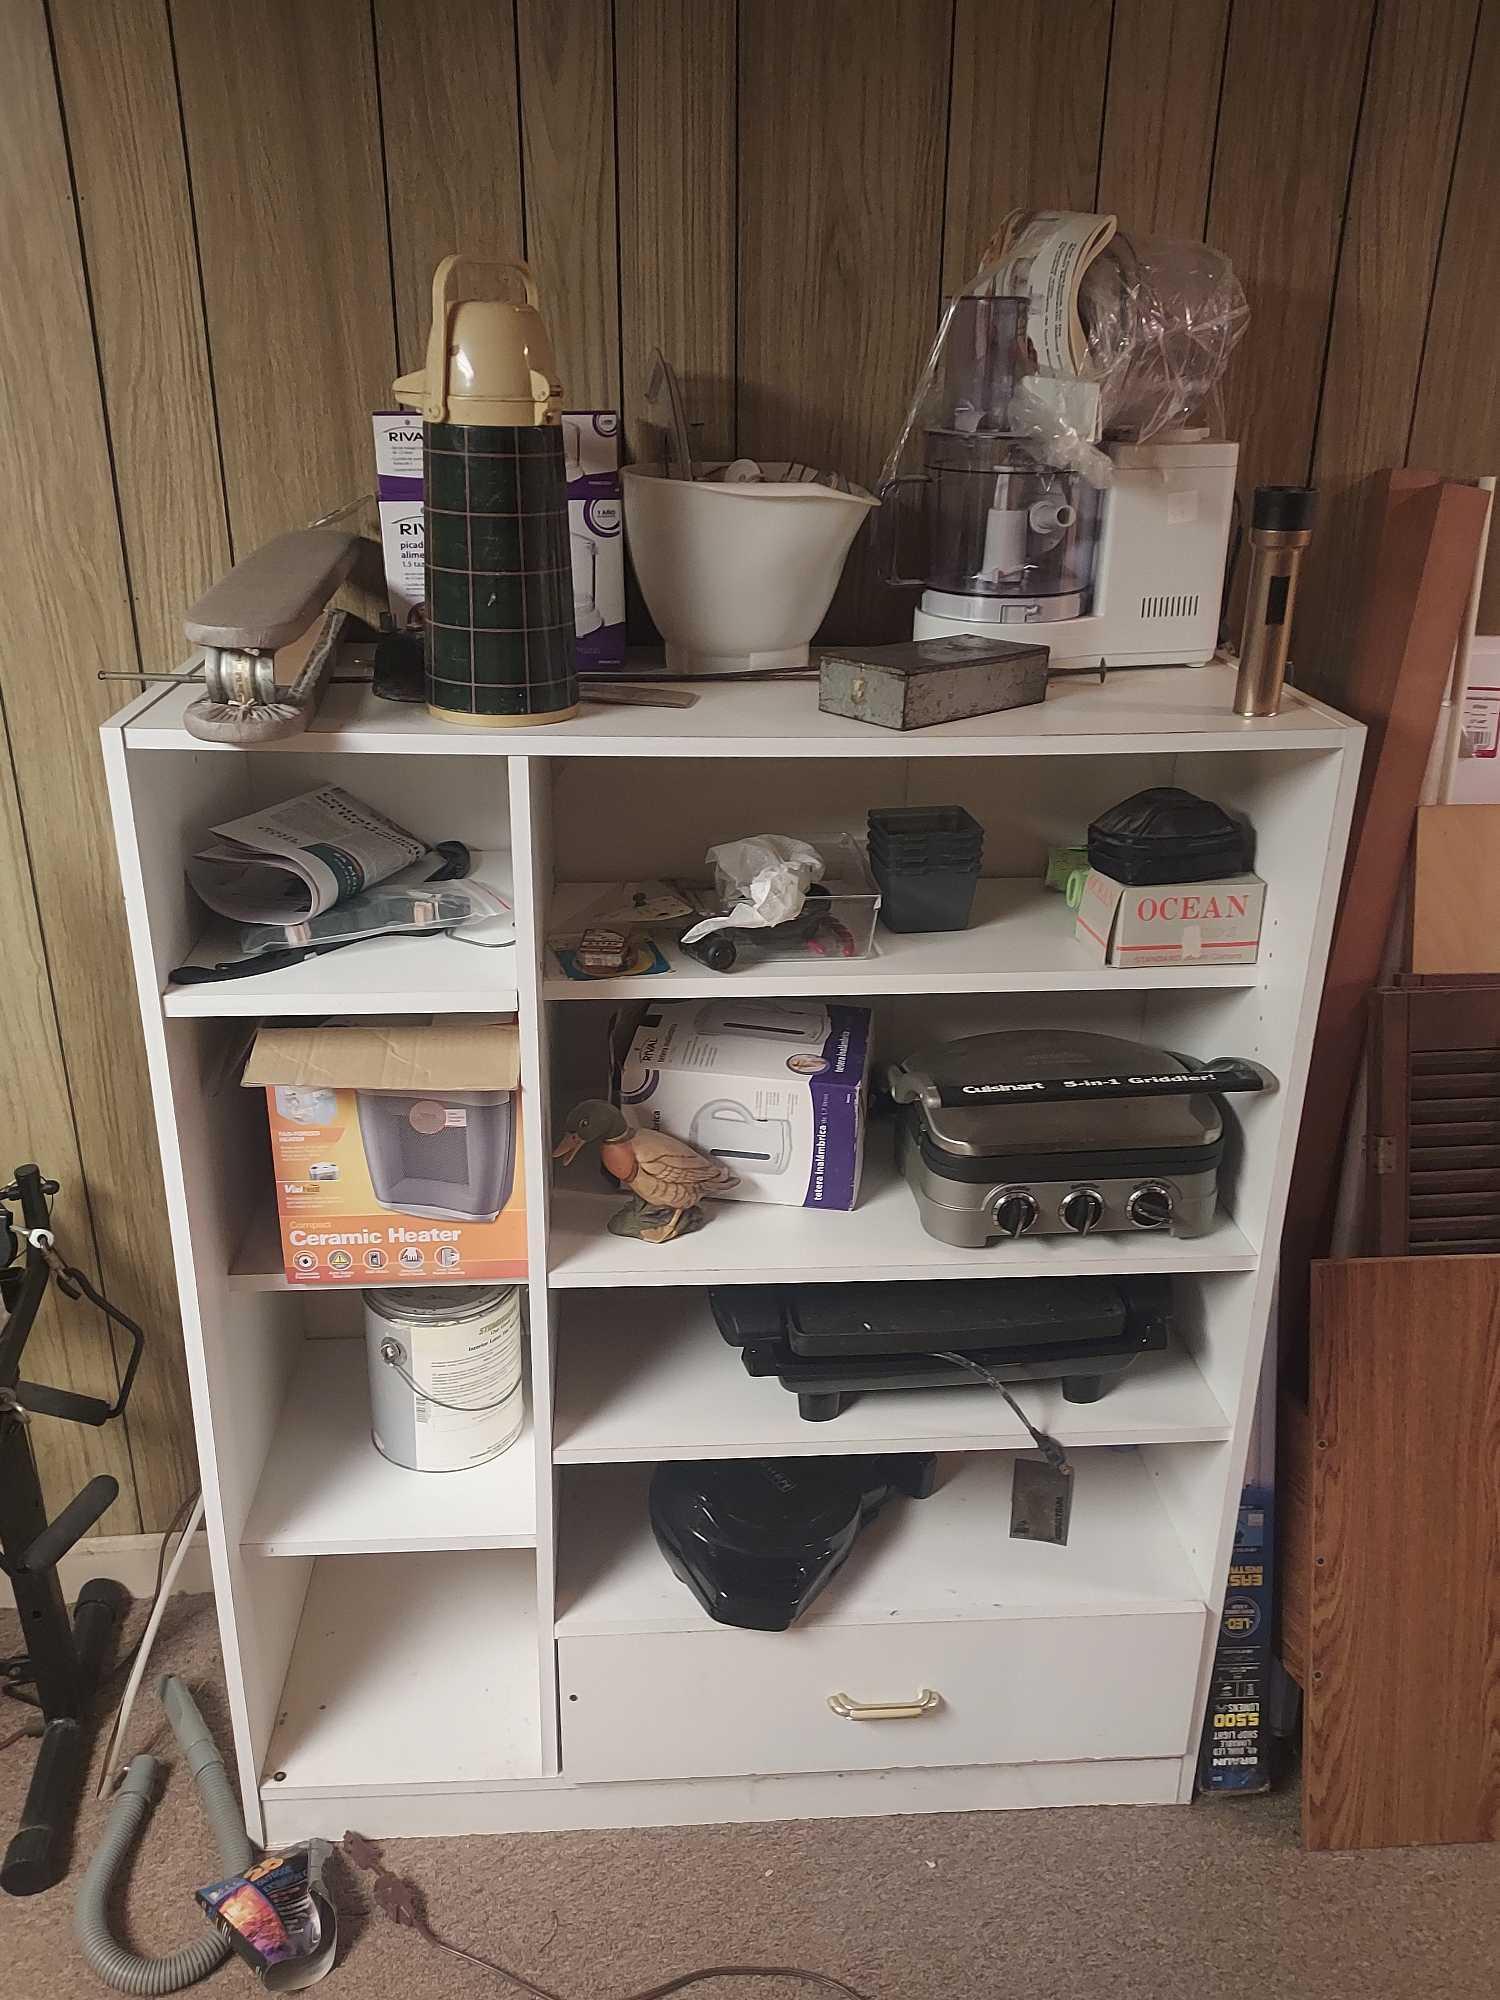 Basement Wall Contents - Kitchen Appliances, Folding Chairs, Stands, & more